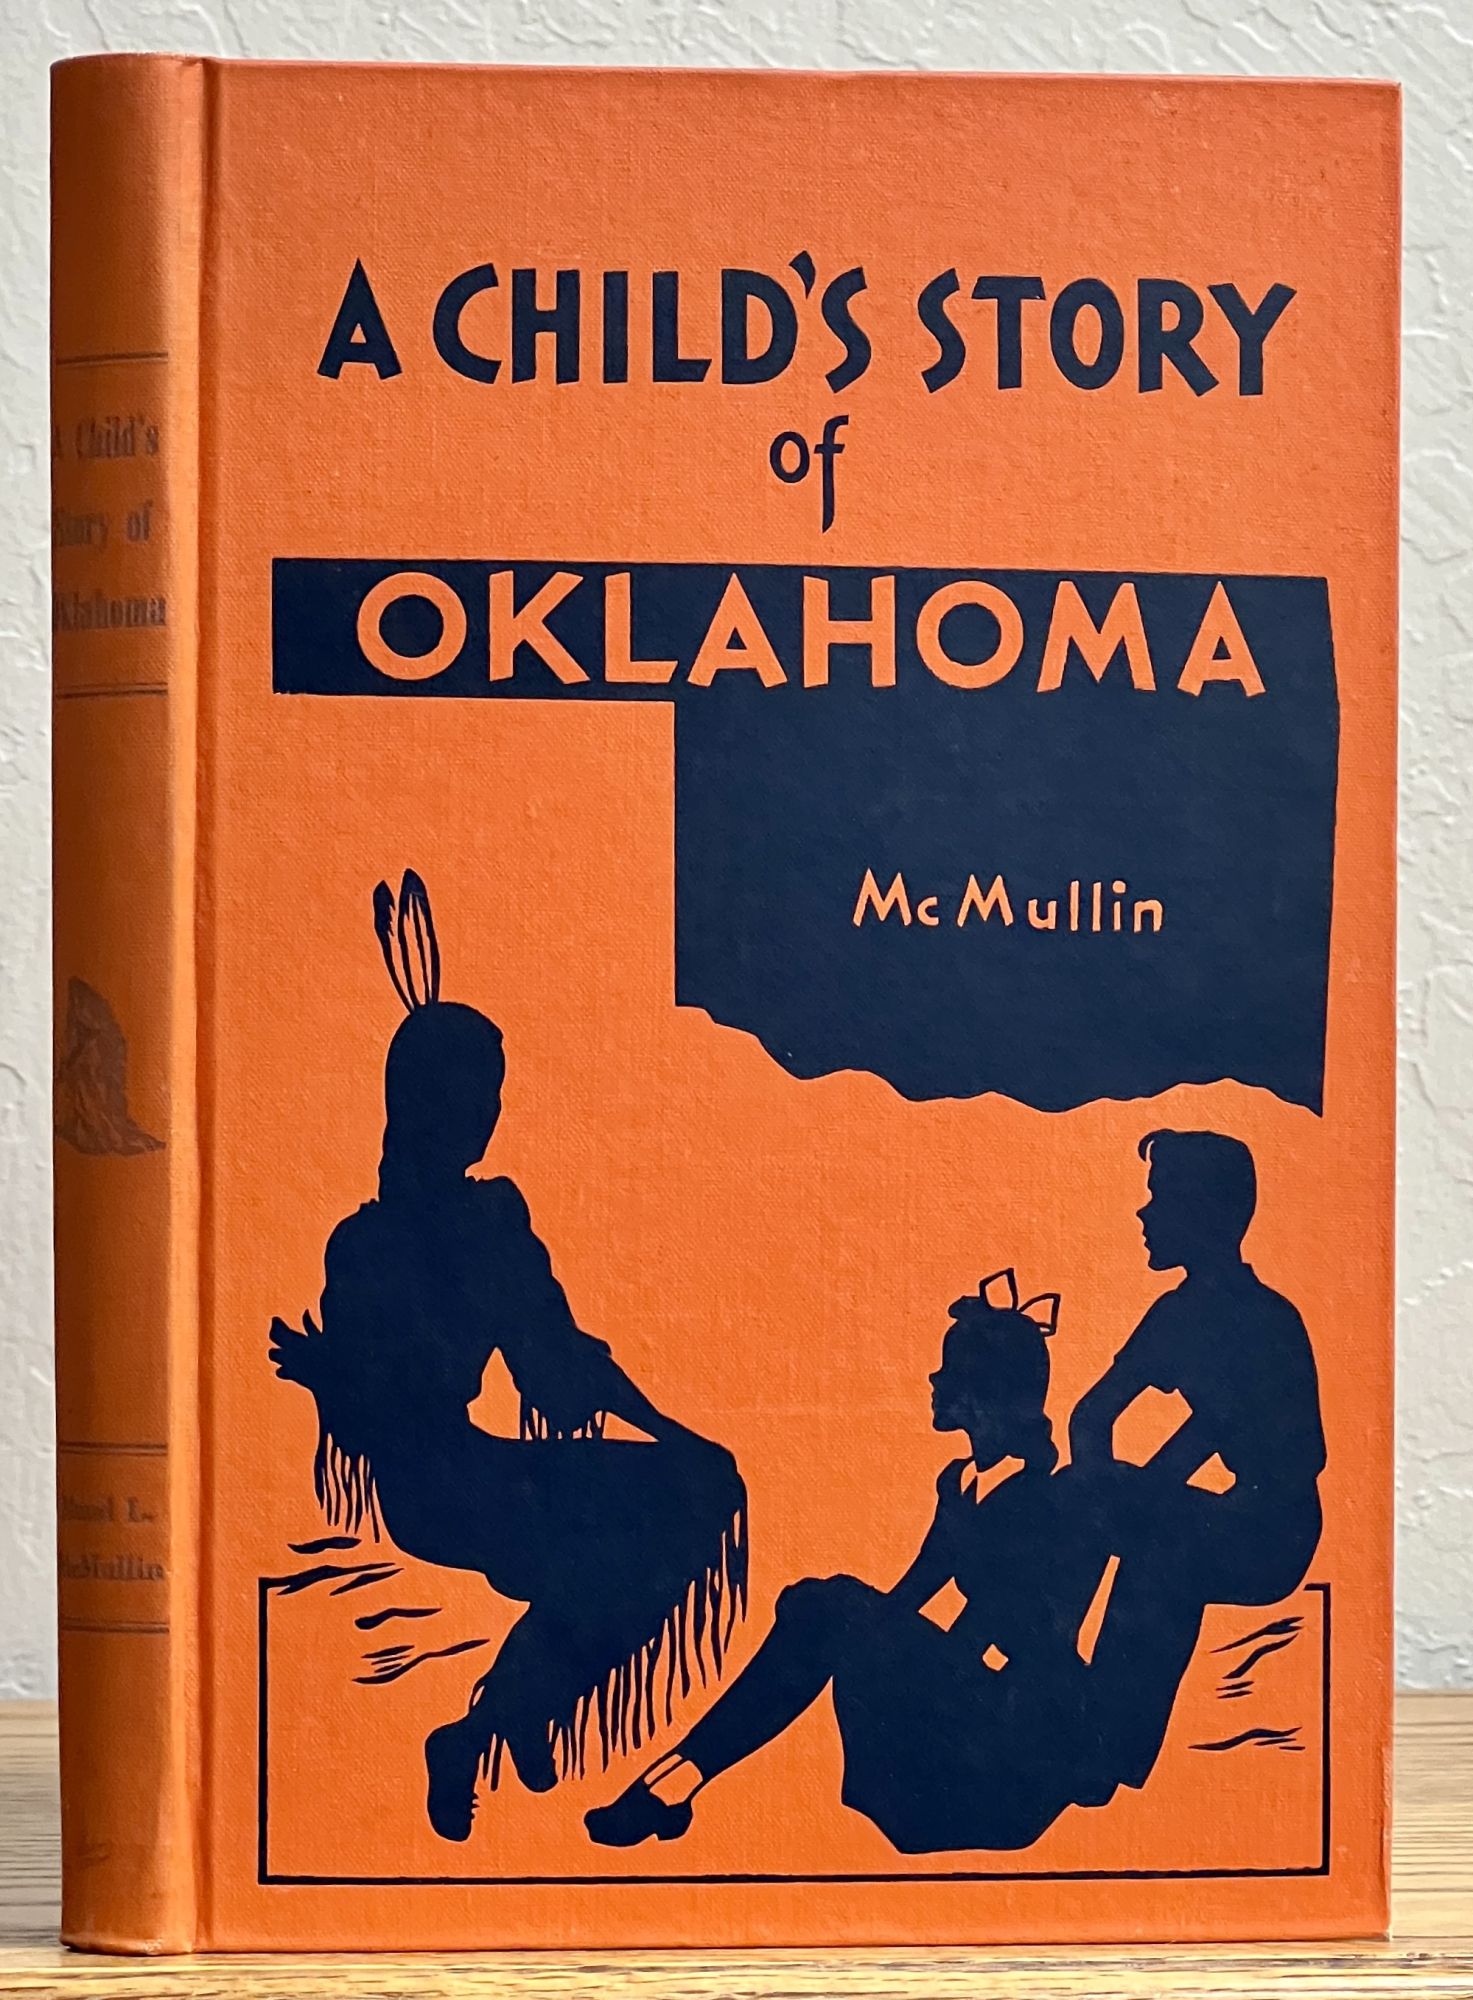 McMullin, Maud Llewllyn - A CHILD'S STORY Of OKLAHOMA